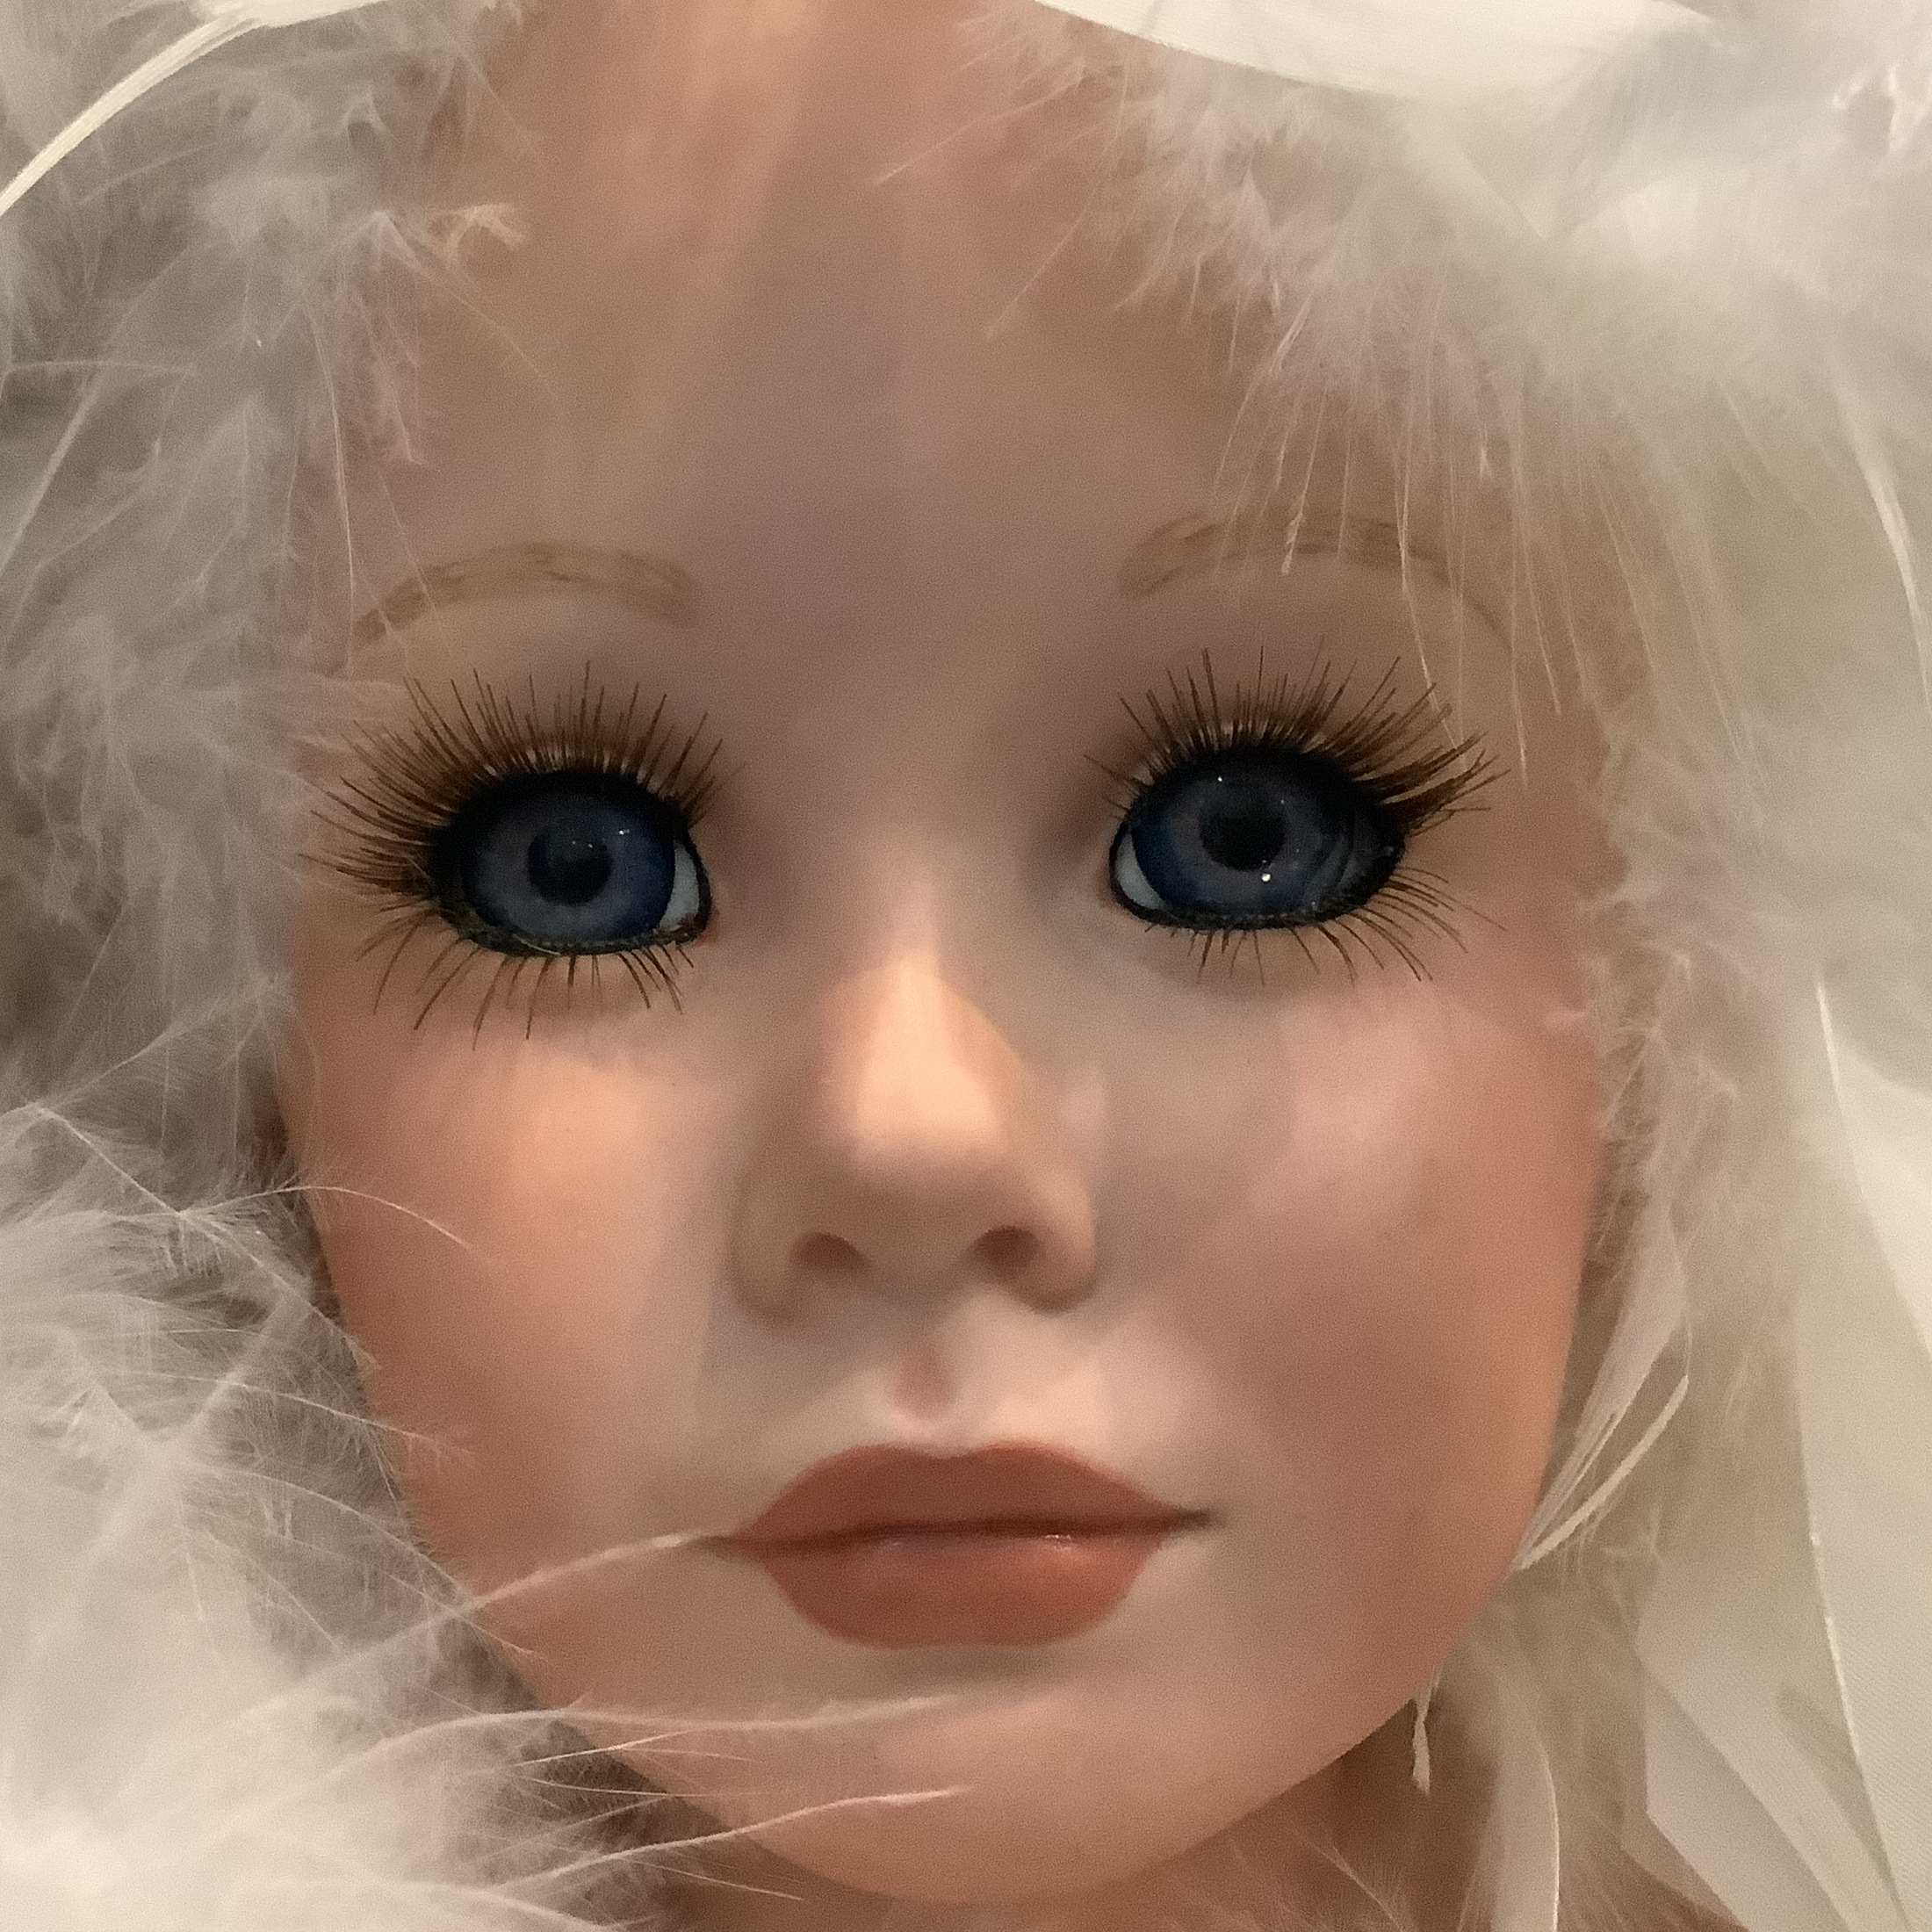 Dancer doll face; light-skinned female doll with dark blue eyes and brown lipstick